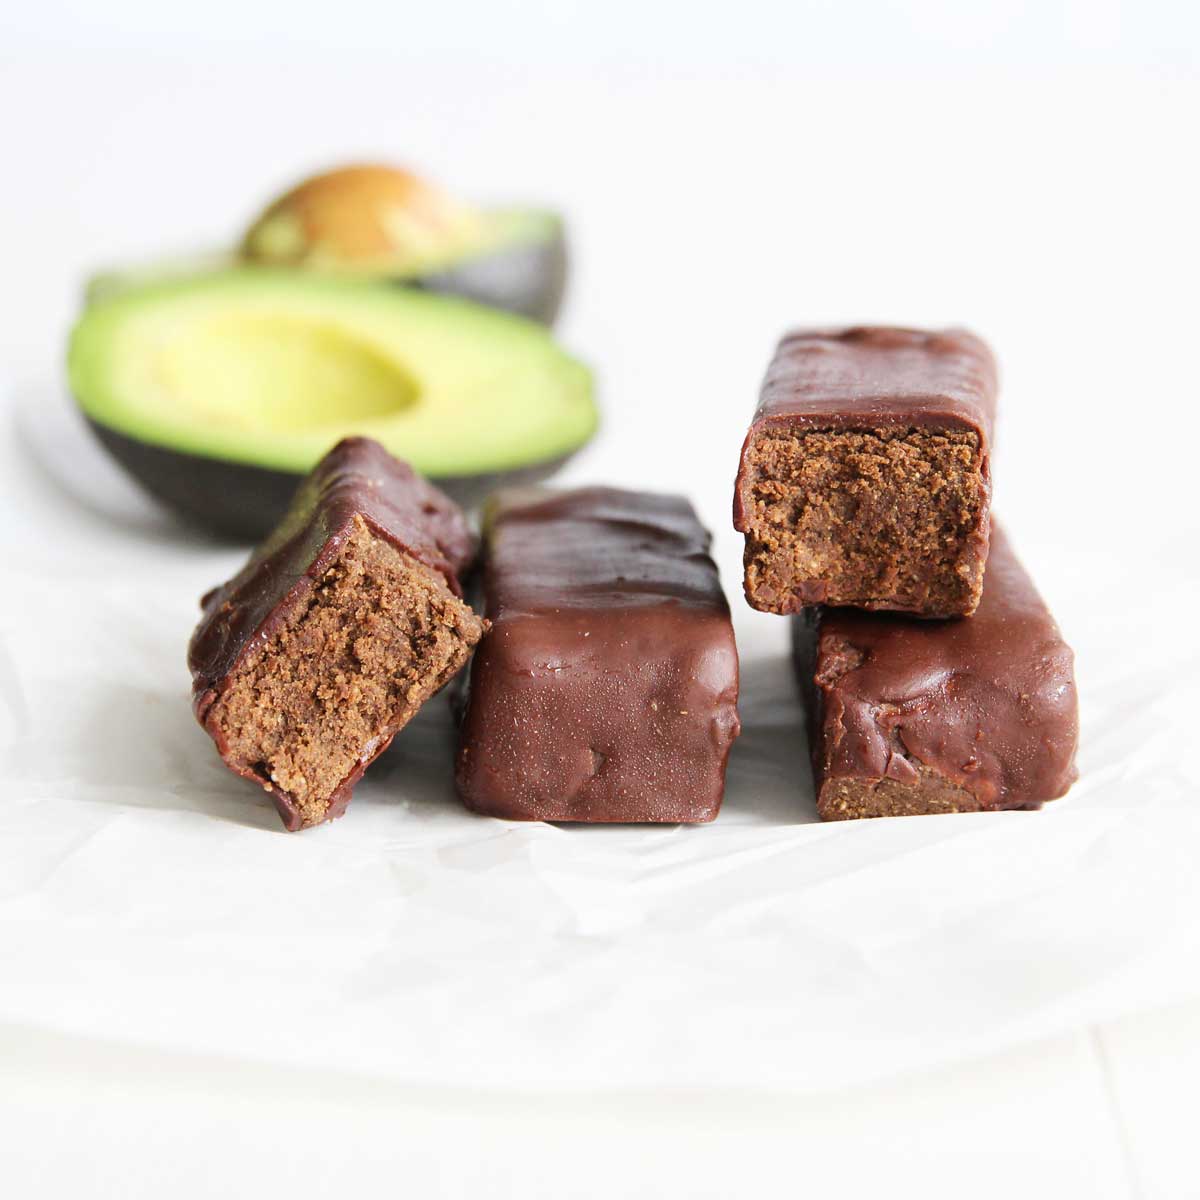 Easy Chocolate Avocado Protein Bars (Healthy, Vegan & Low Carb Recipe!) - PB Fit Protein Bars